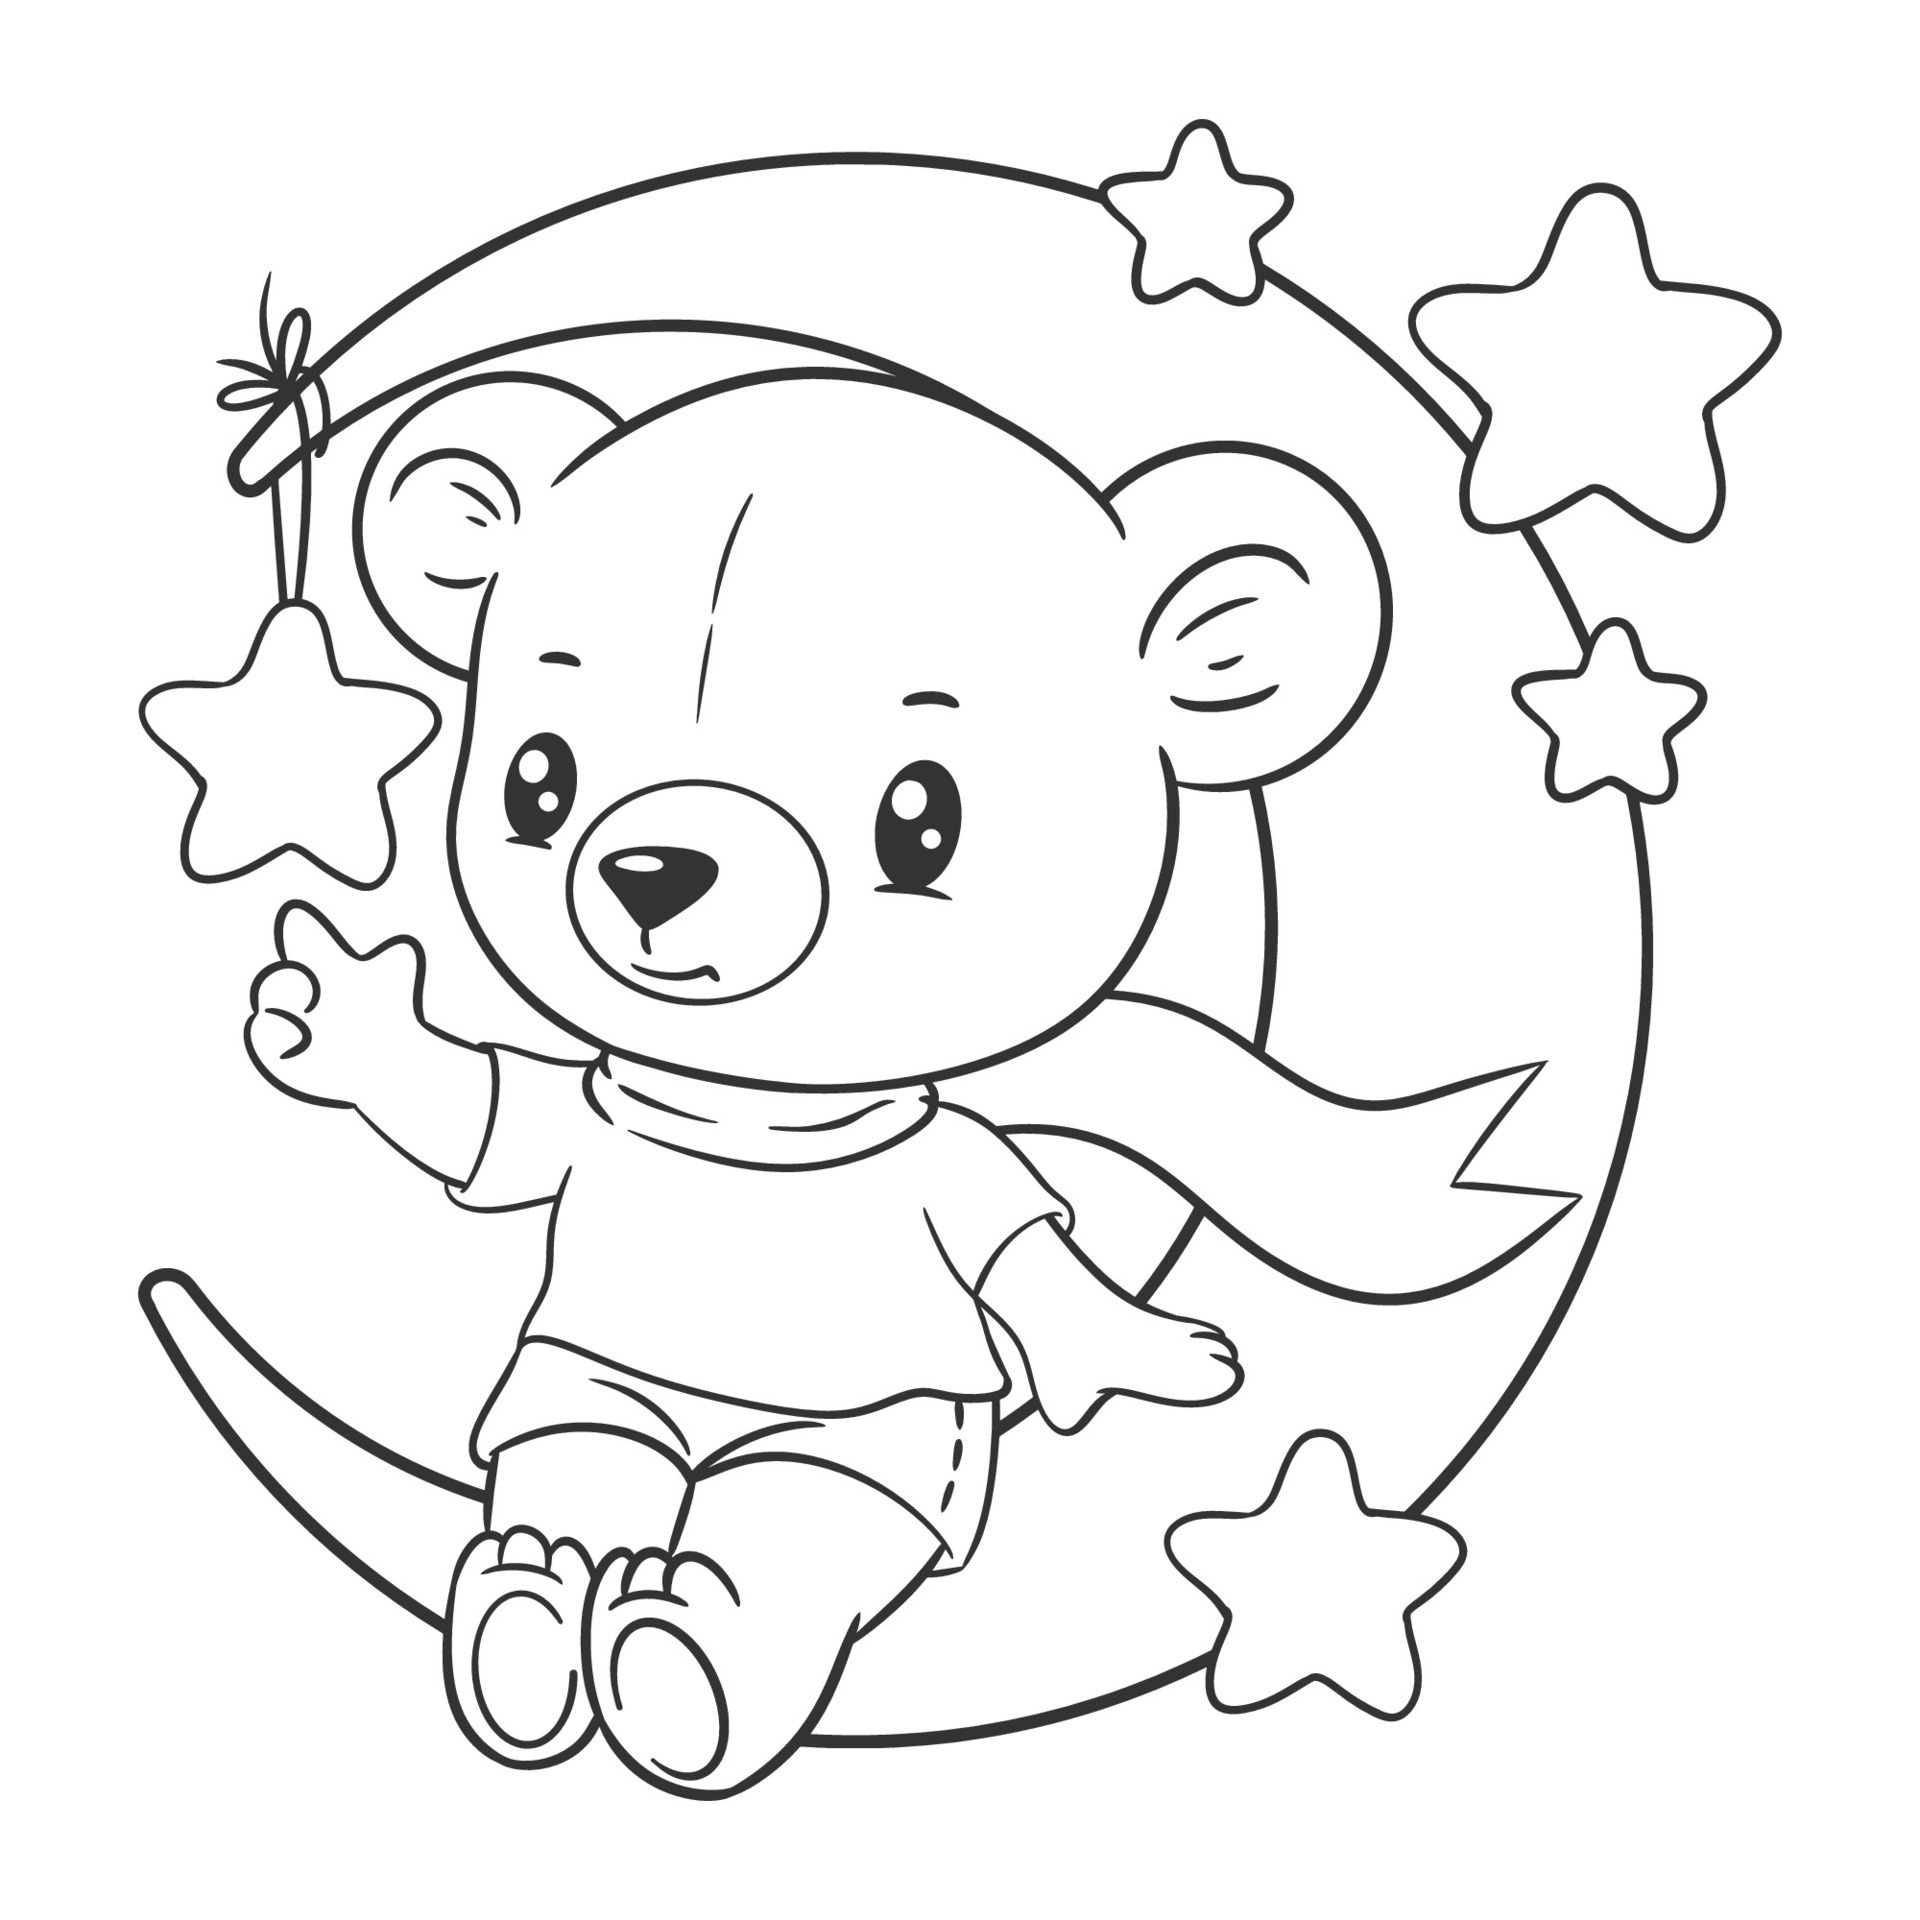 Teddy bear on the moon for coloring 27431868 Vector Art at Vecteezy